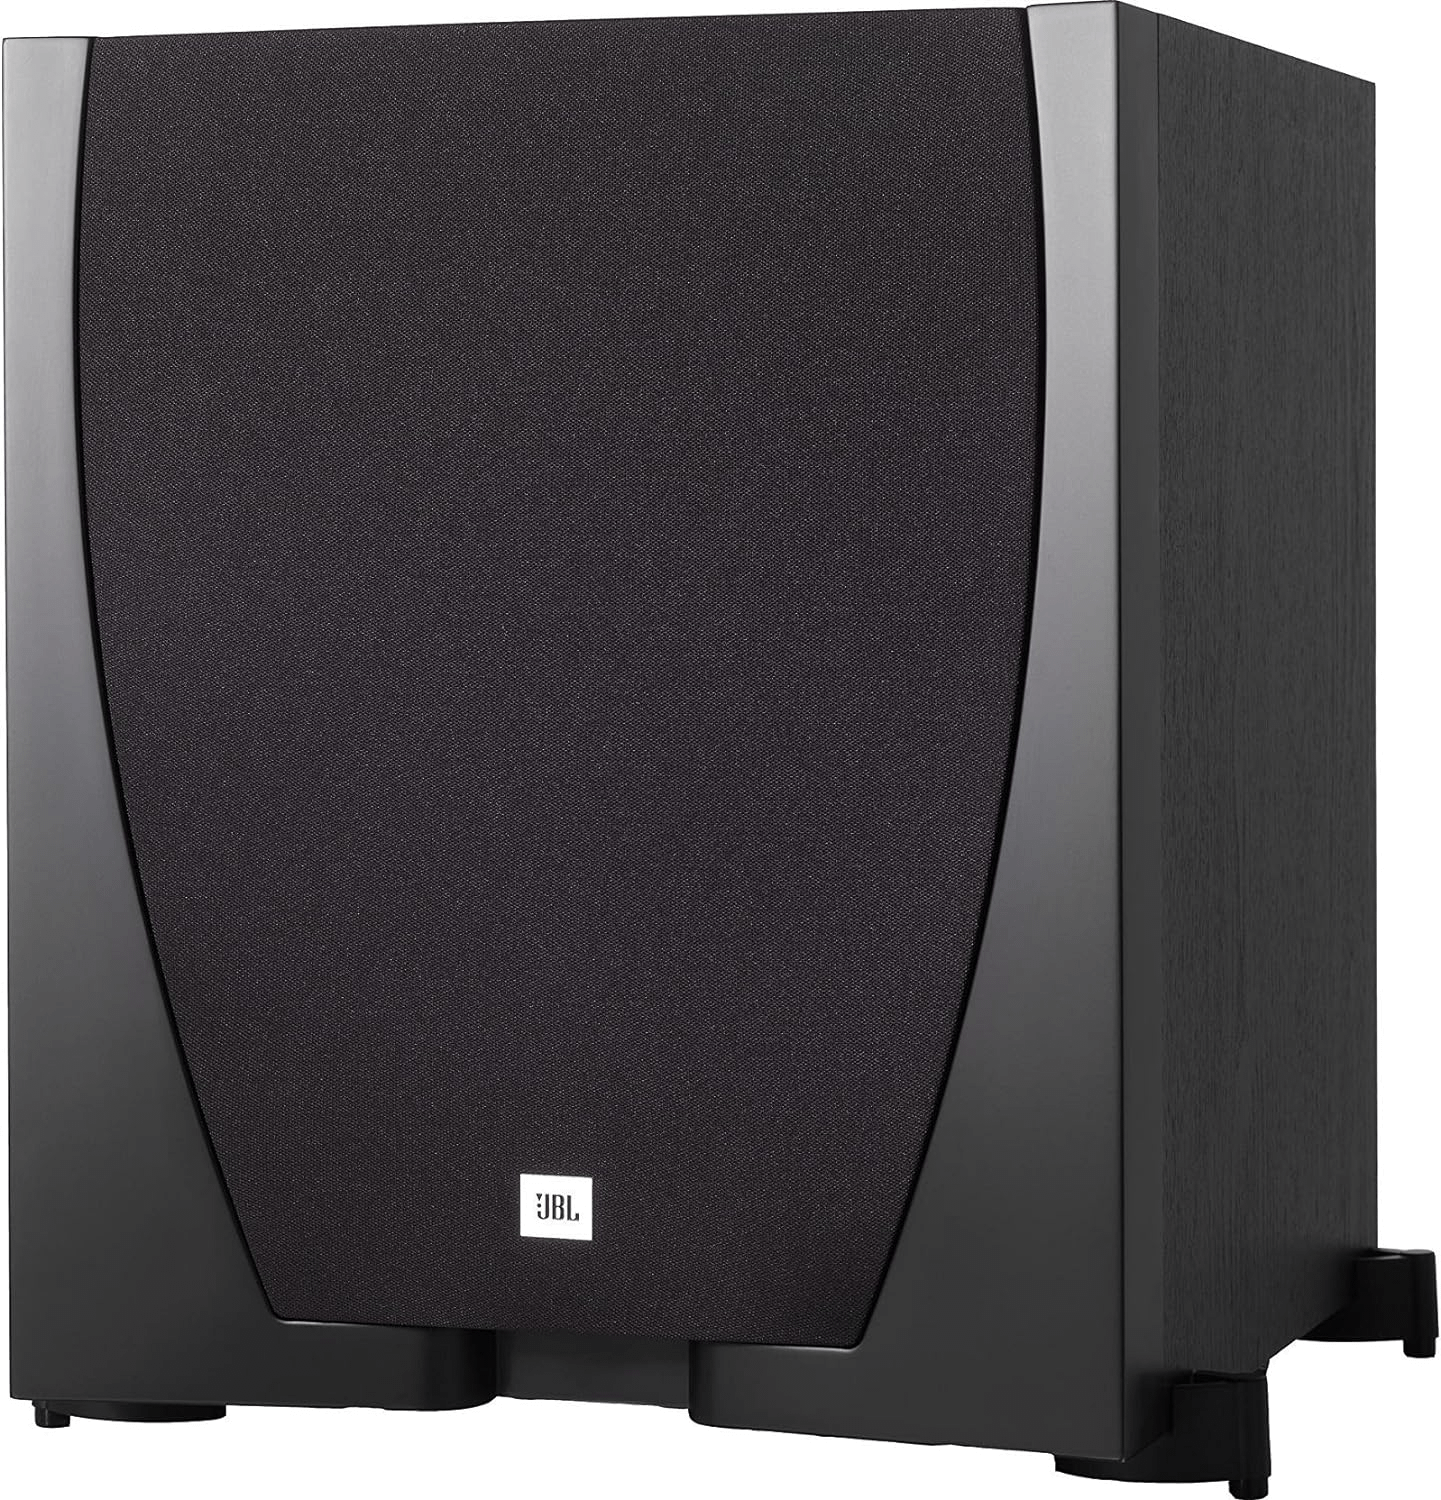 January Subwoofer Deals - JBL Sub 550P High-Performance 10" Powered Subwoofer